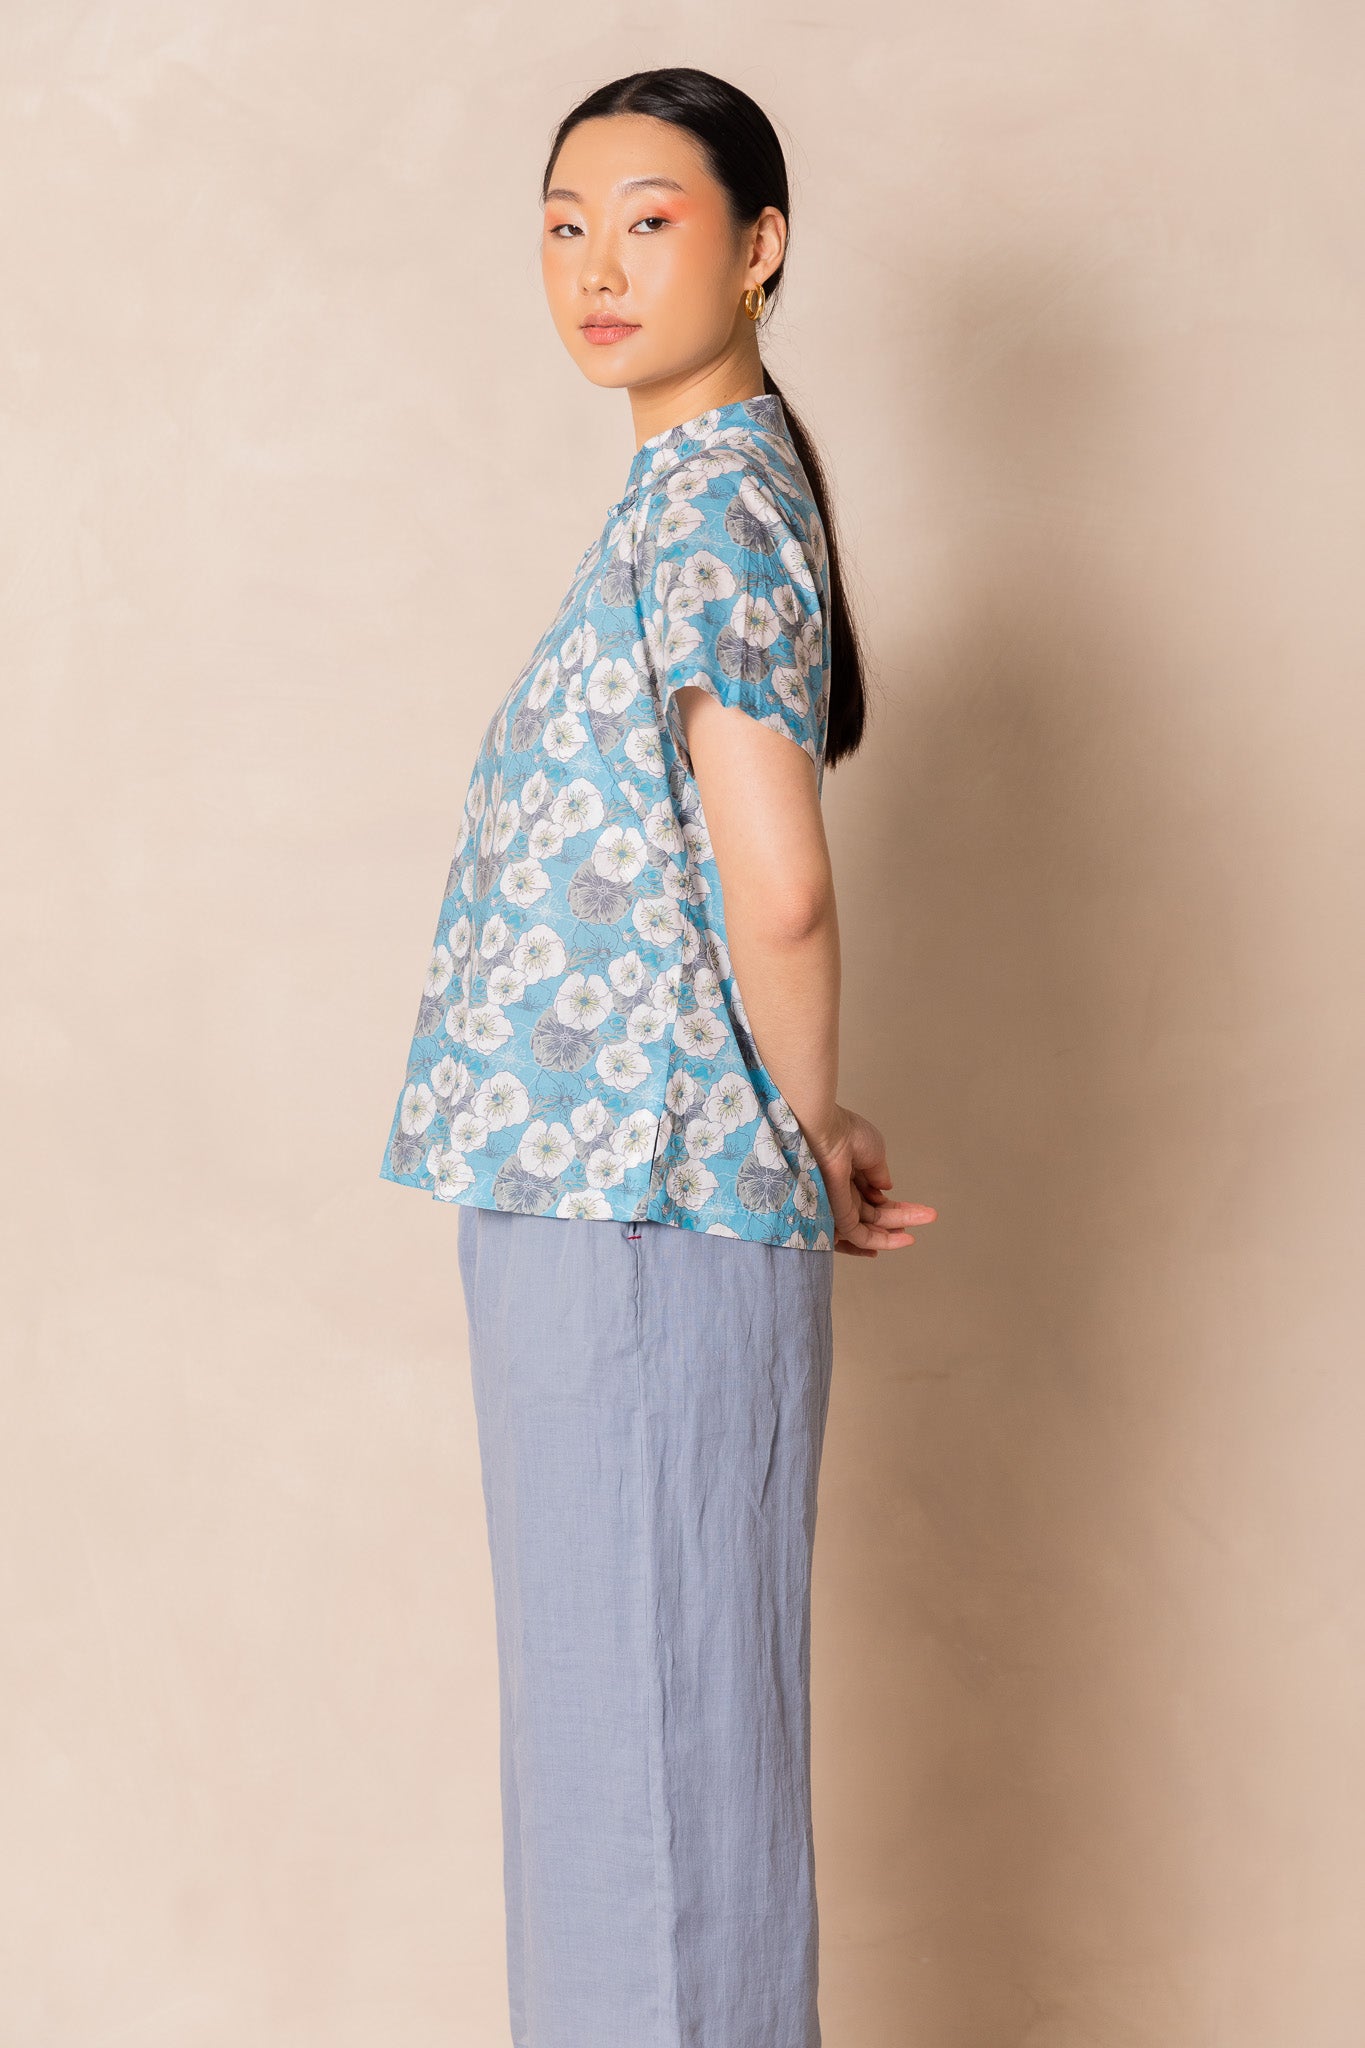 White Cherry Blossom Short Sleeve Cheongsam Top, available on You Living